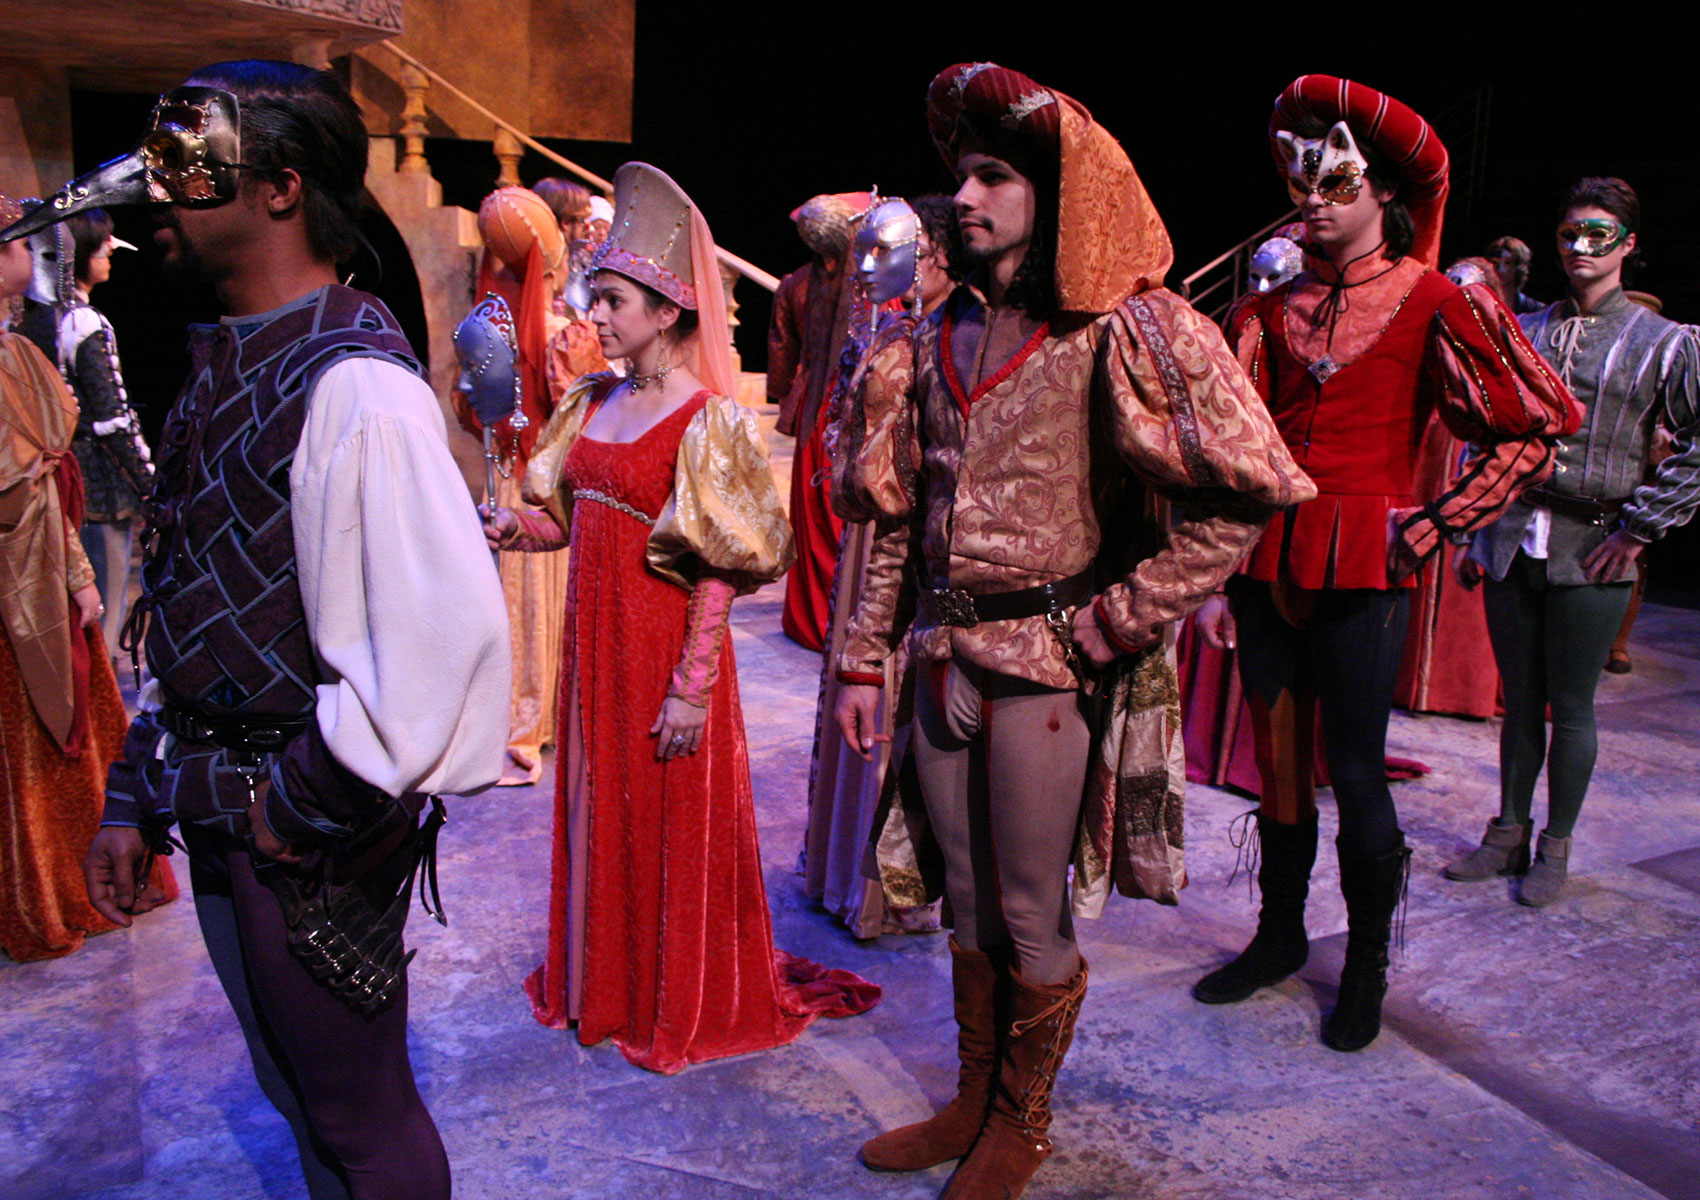 Many characters stand on stage in costumes, some wearing masks, in rows.